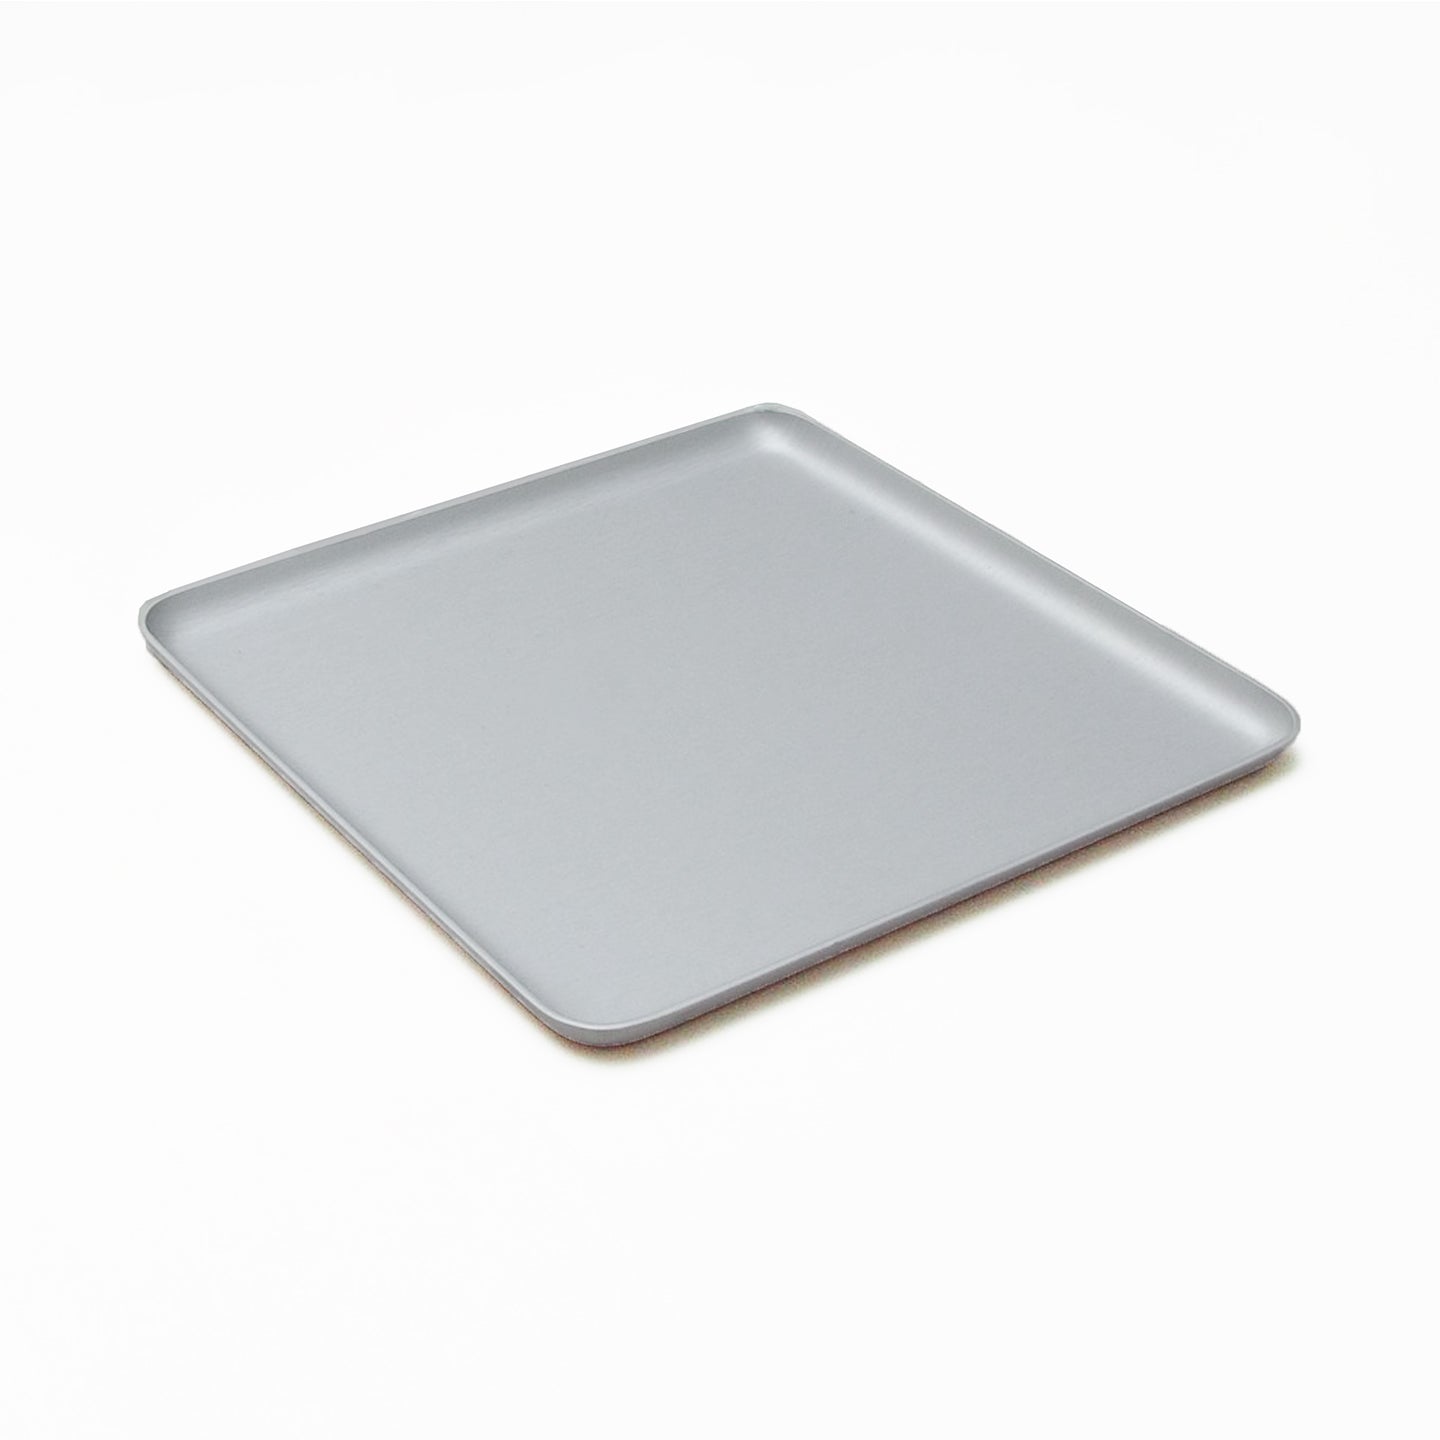 Kaymet Serving Tray Square Silver / 17x17cm